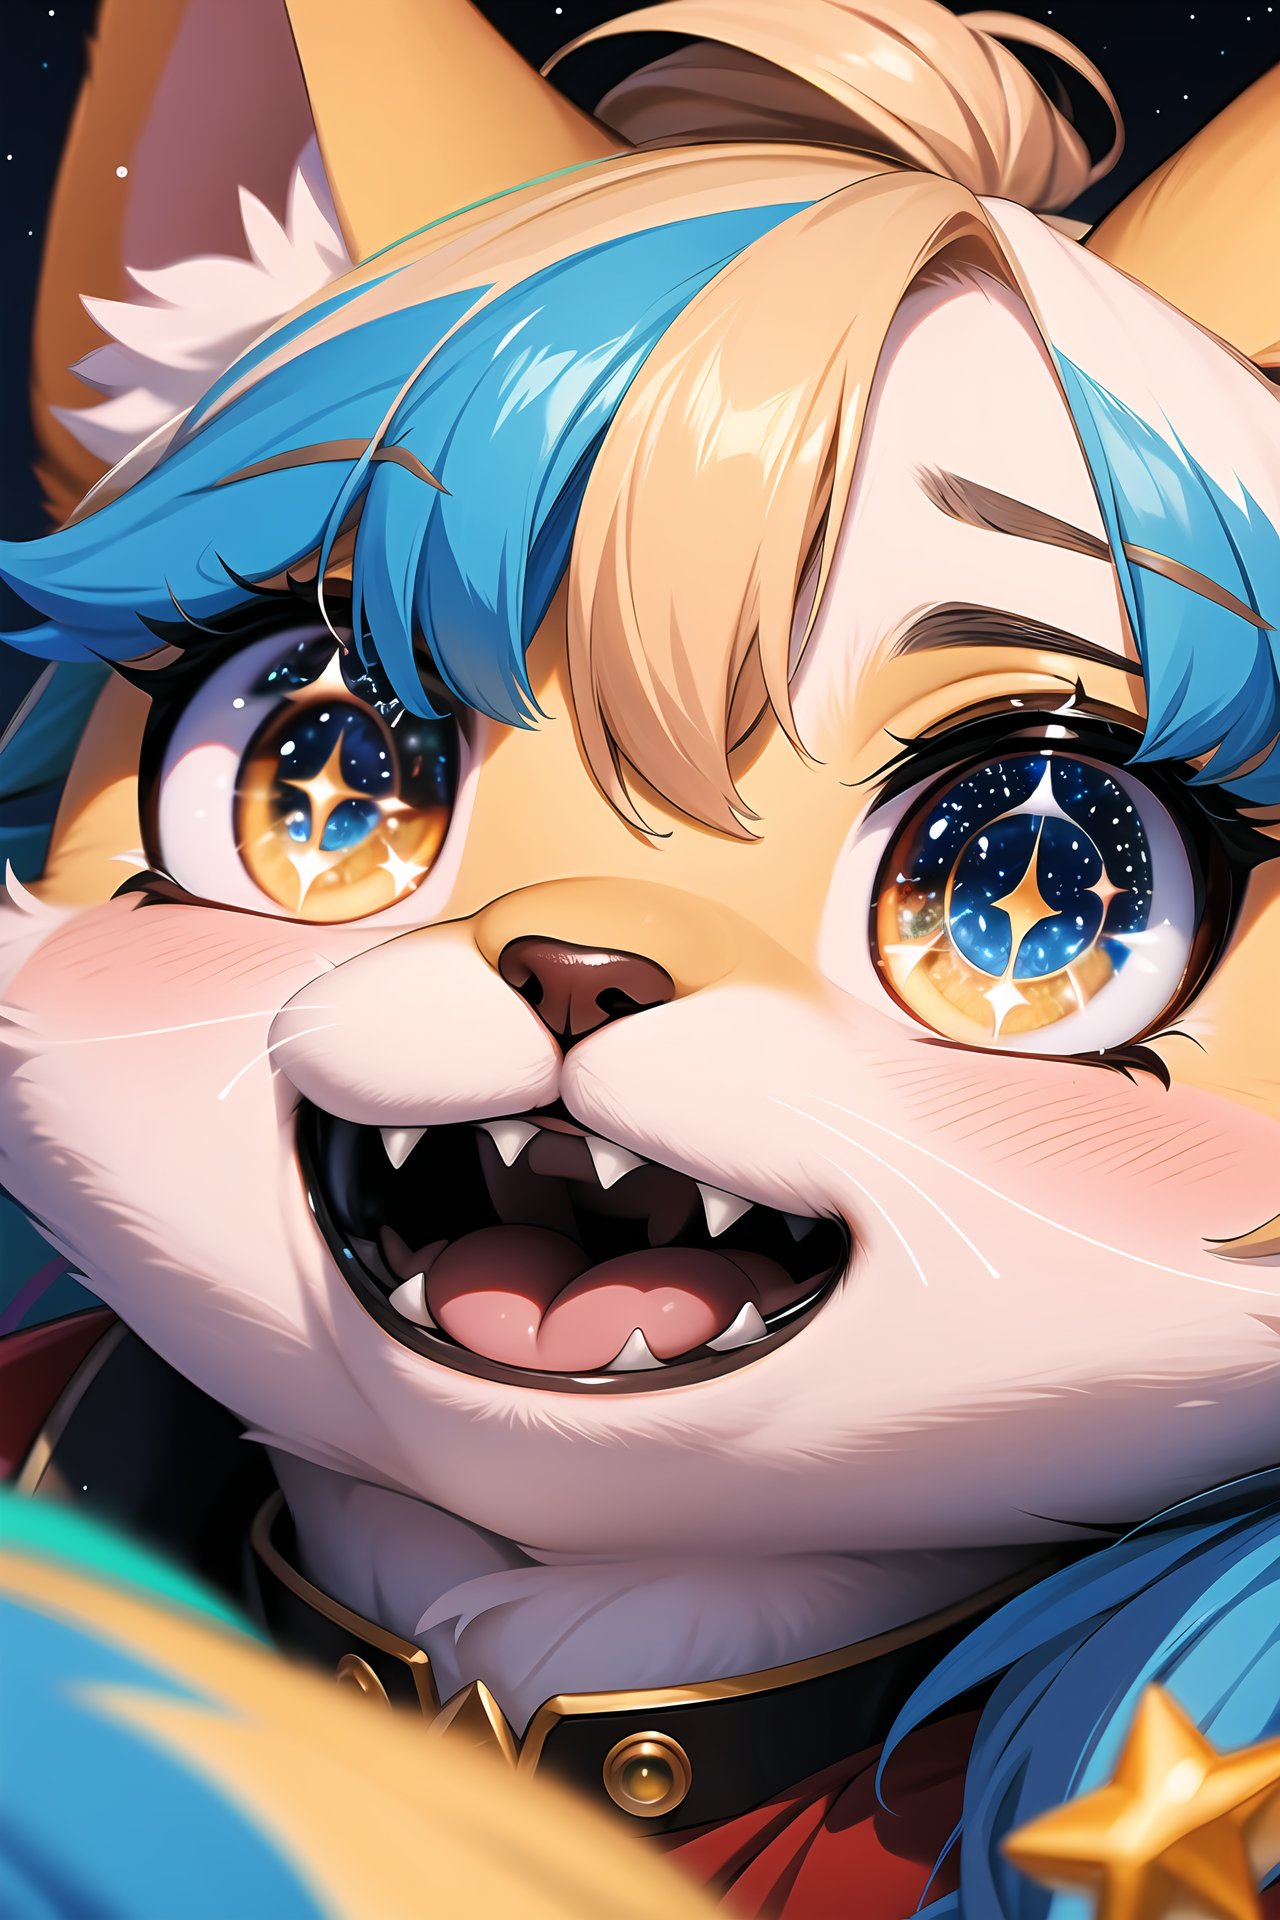 (furry:1.2), realistic fur, details down to every fluff, big eyes, A little anime boy with close - up eyes, sparkling eyes, close - up, two eyes looking forward, long eyelashes, bangs, surrounded by many colorful stars, brilliant colors, meteors, MilkyWay, colorful star clusters, close - up shots, oil painting style, very obvious oil painting minimalist palette style, 32k uhd, beautiful booru, old era, color manga